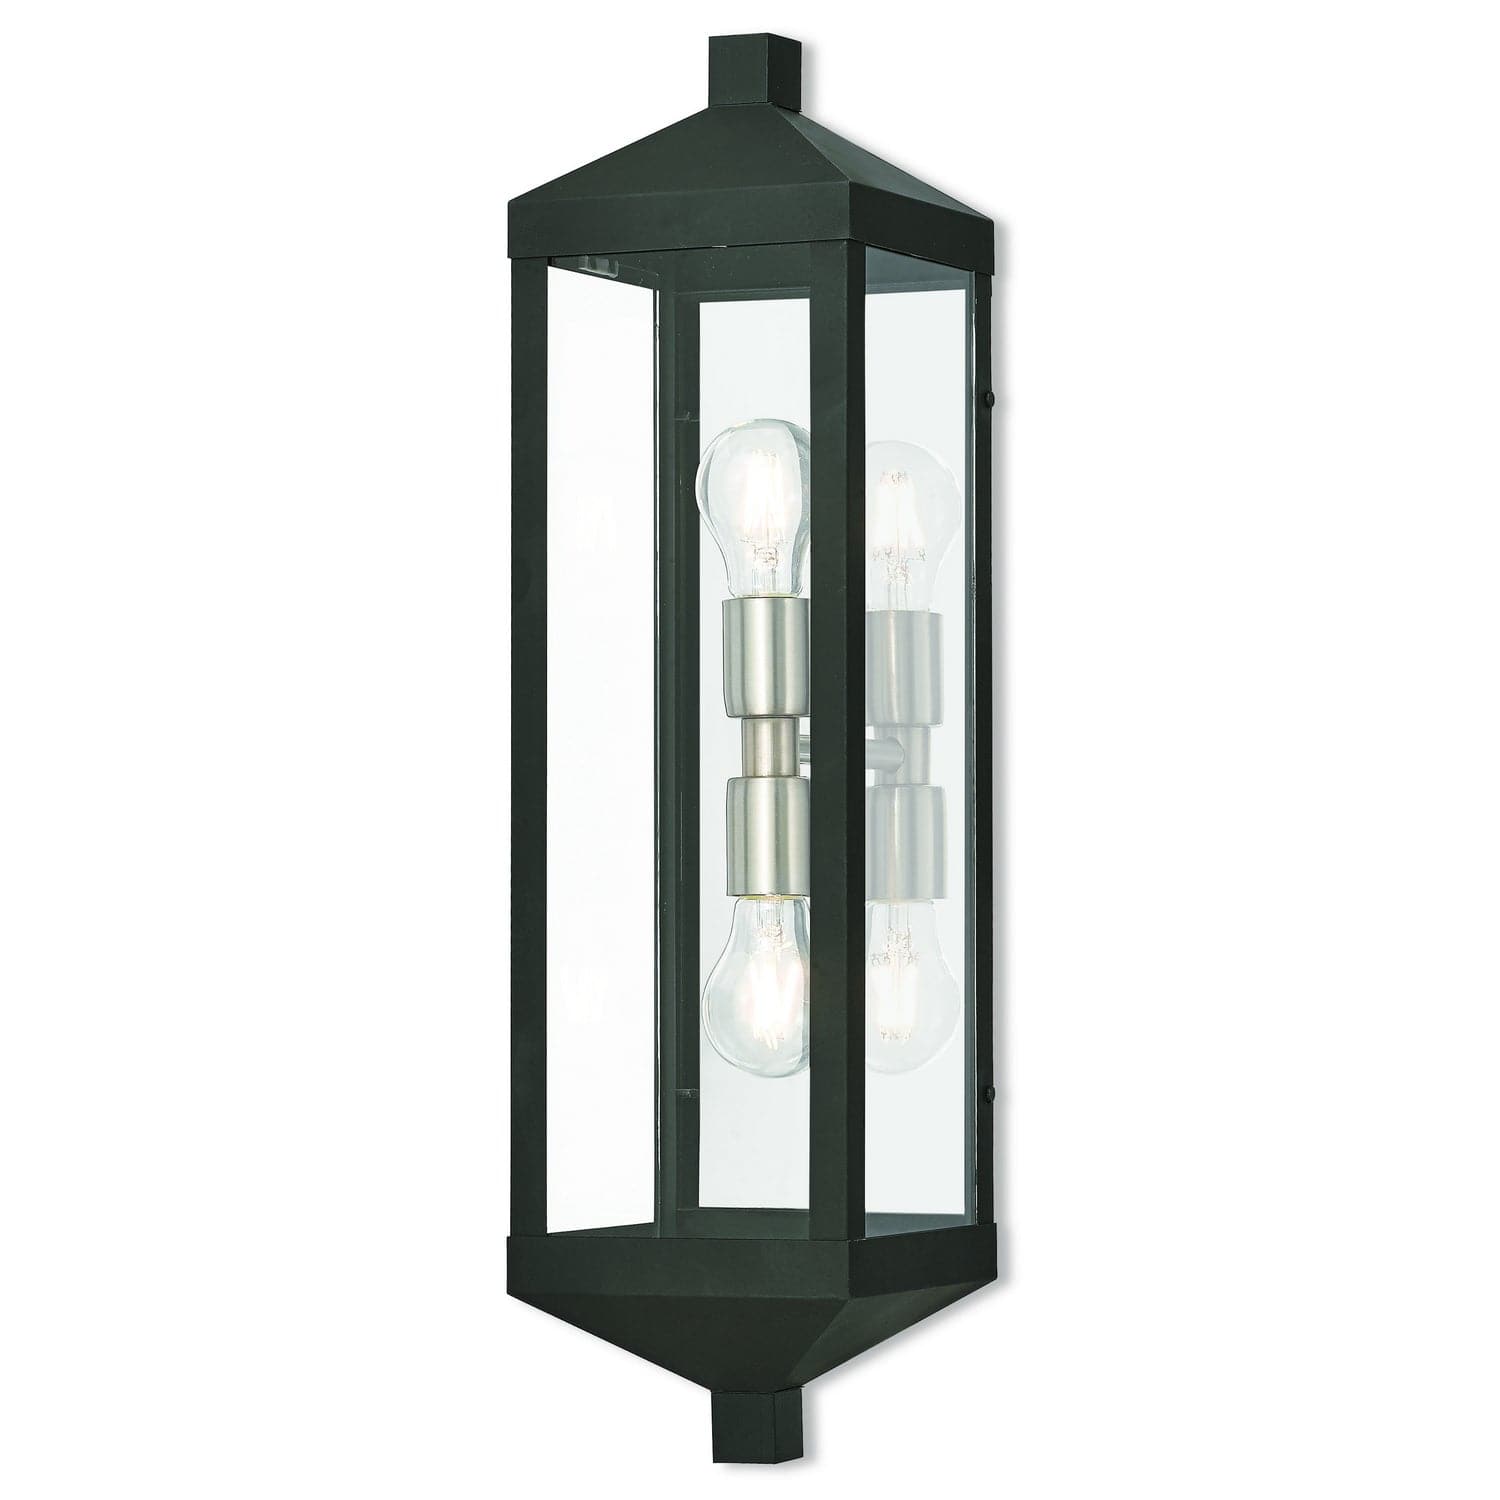 Livex Lighting - 20583-04 - Two Light Outdoor Wall Lantern - Nyack - Black w/ Brushed Nickel Cluster and Polished Chrome Stainless Steel